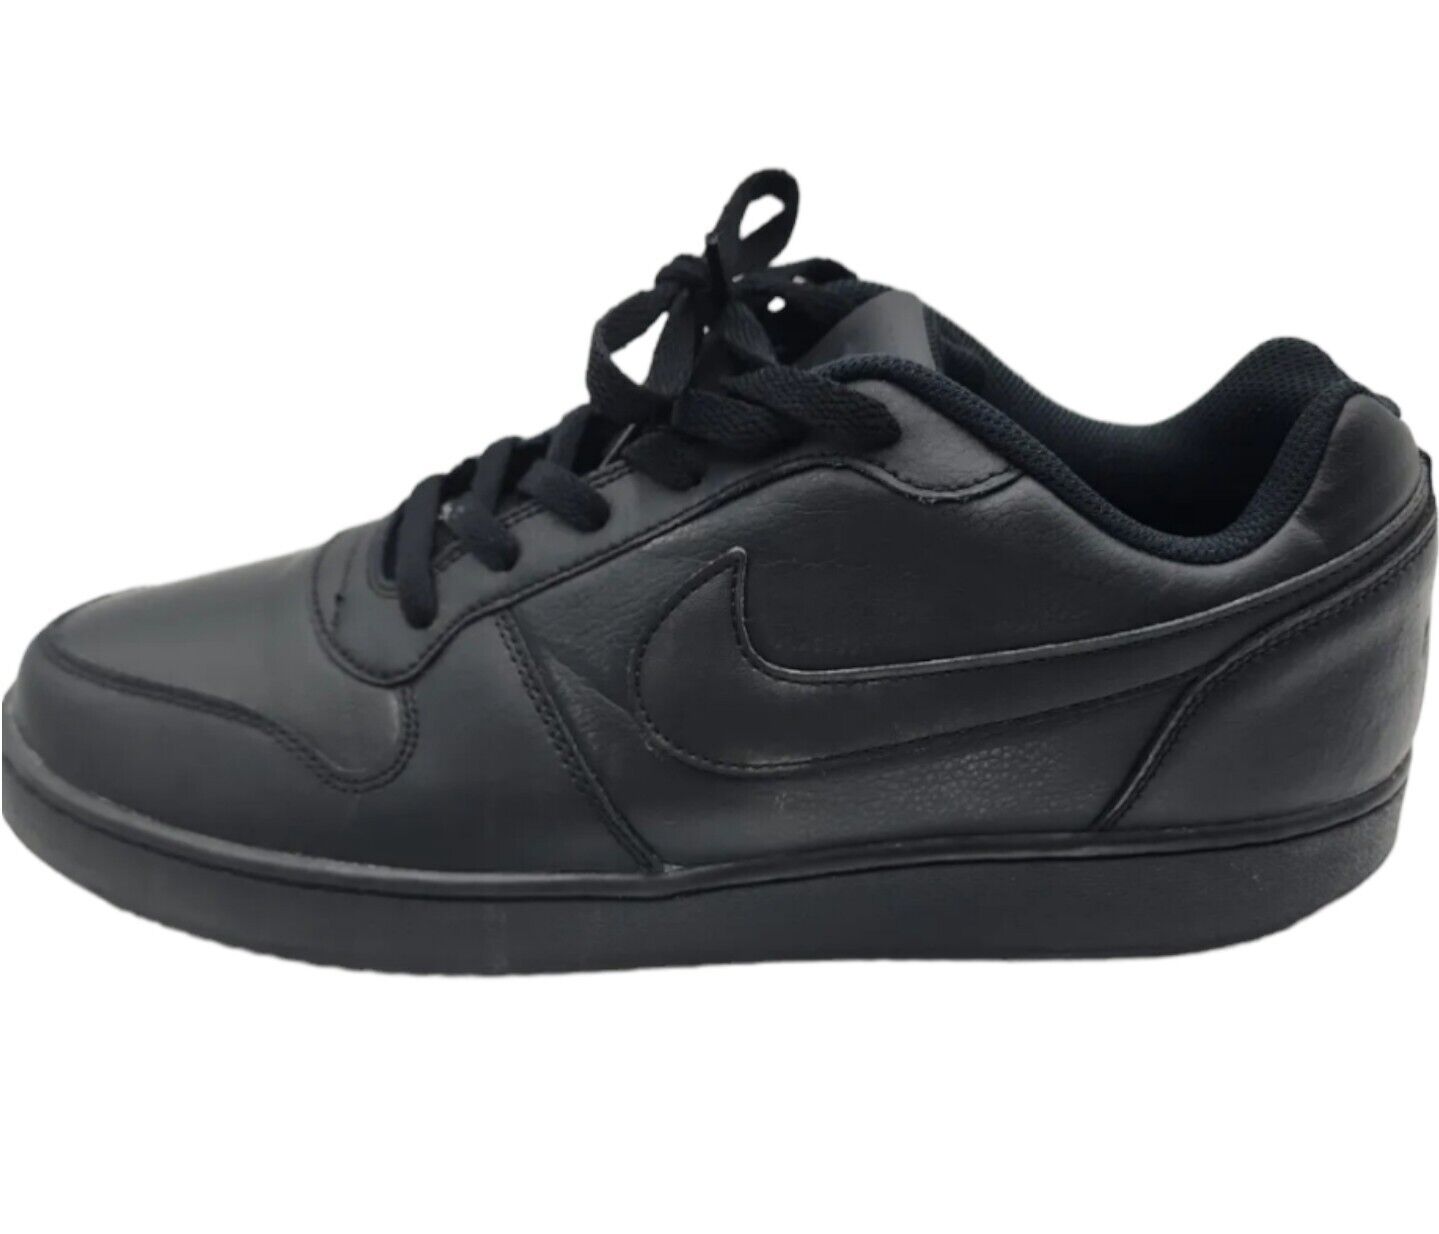 Nike Ebernon 13 Mens Top Lace Up All Black Leather Sneaker | eBay